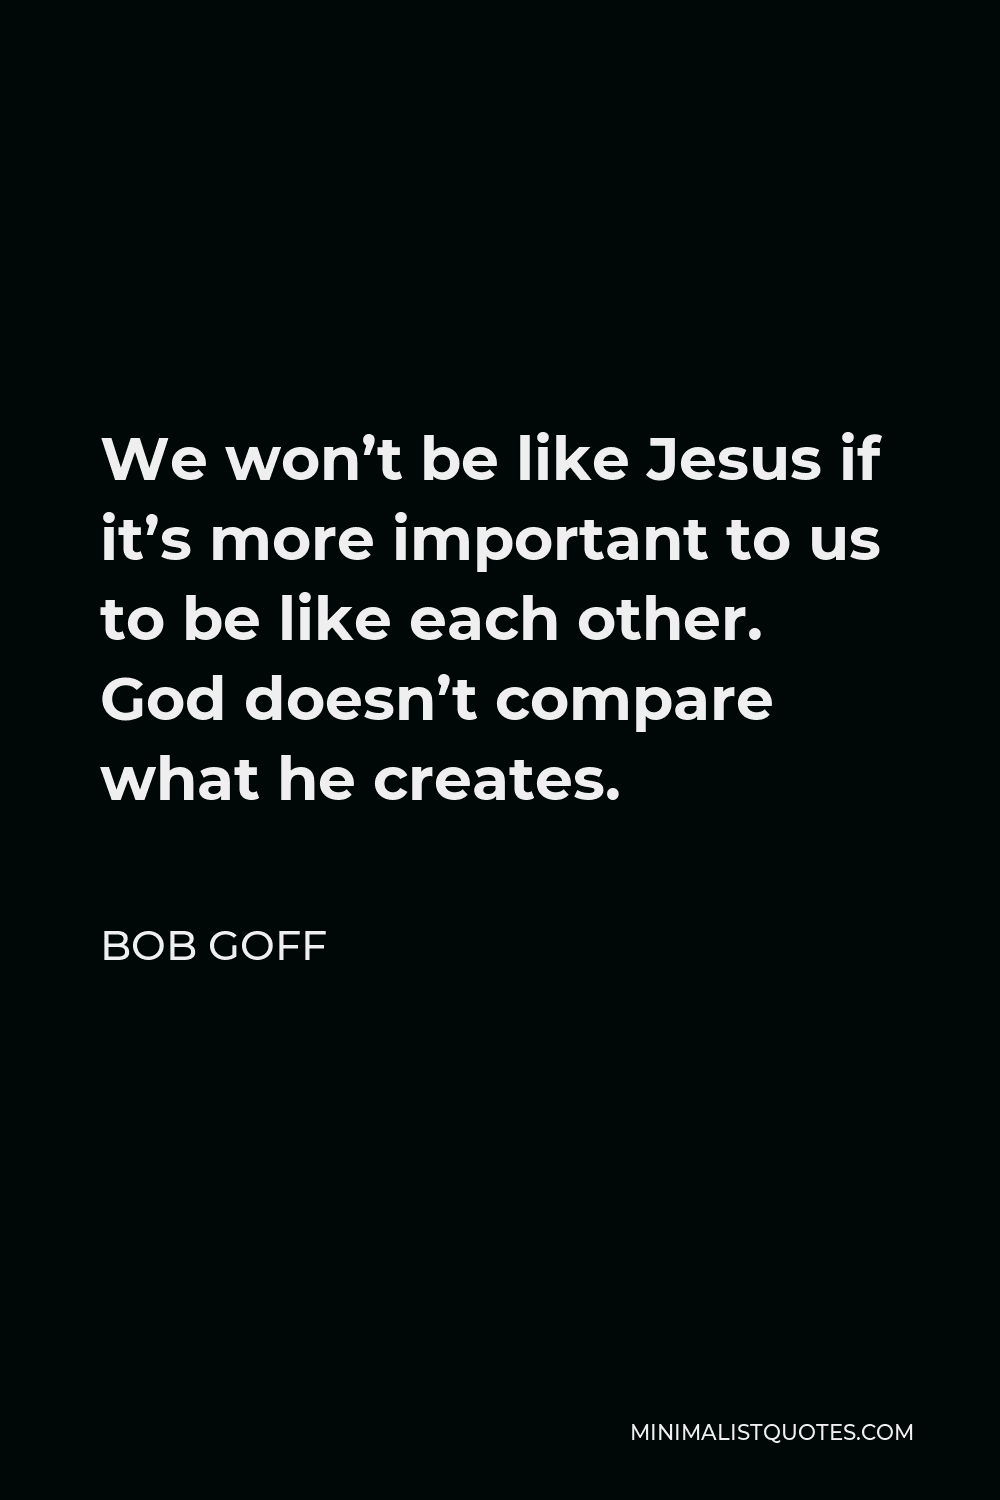 Bob Goff Quote - We won’t be like Jesus if it’s more important to us to be like each other. God doesn’t compare what he creates.